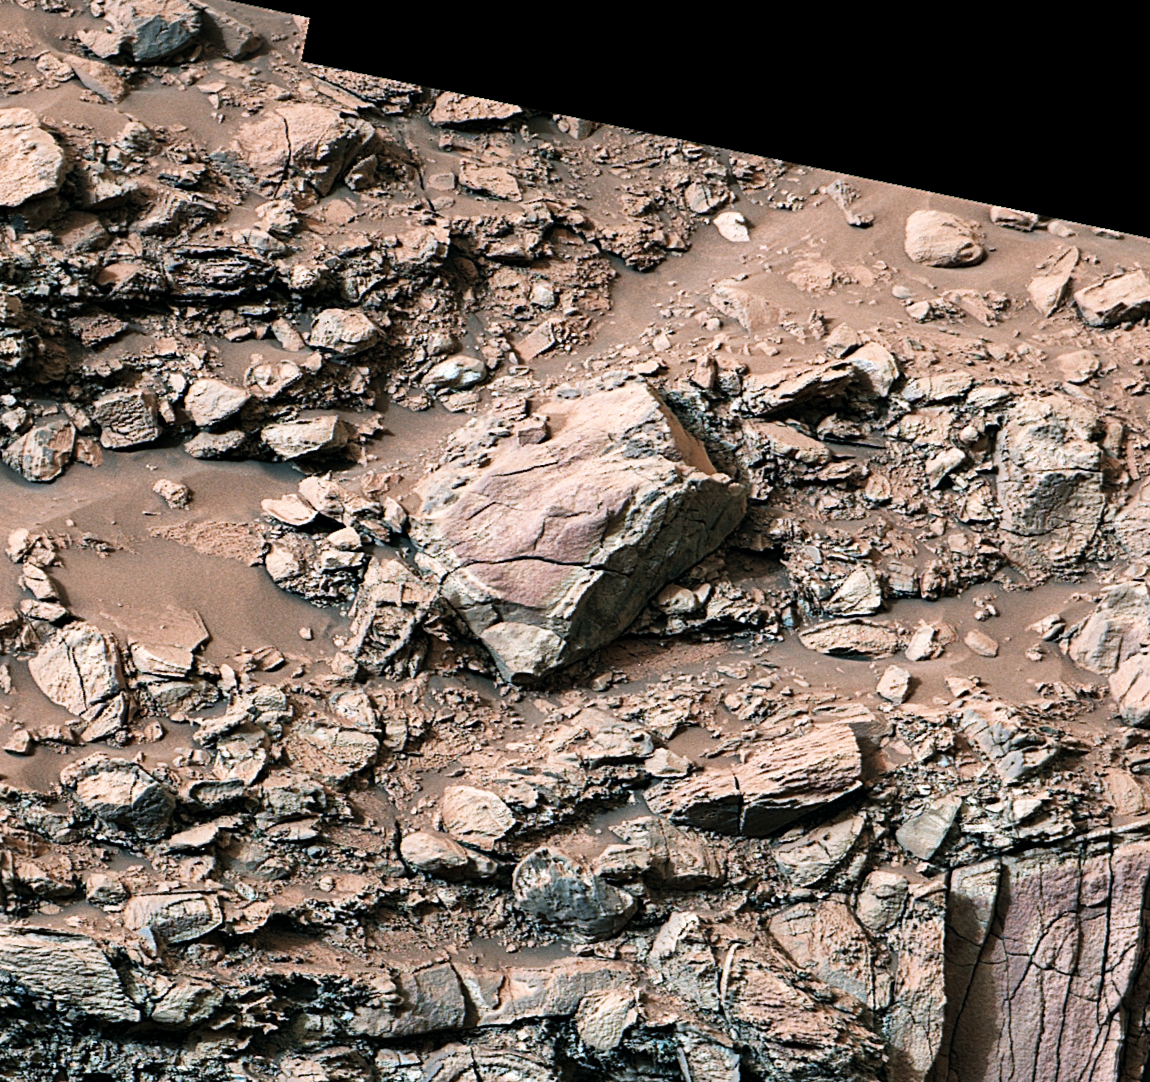 Mars rocks that show a pale color near their edges. These rings, also calle